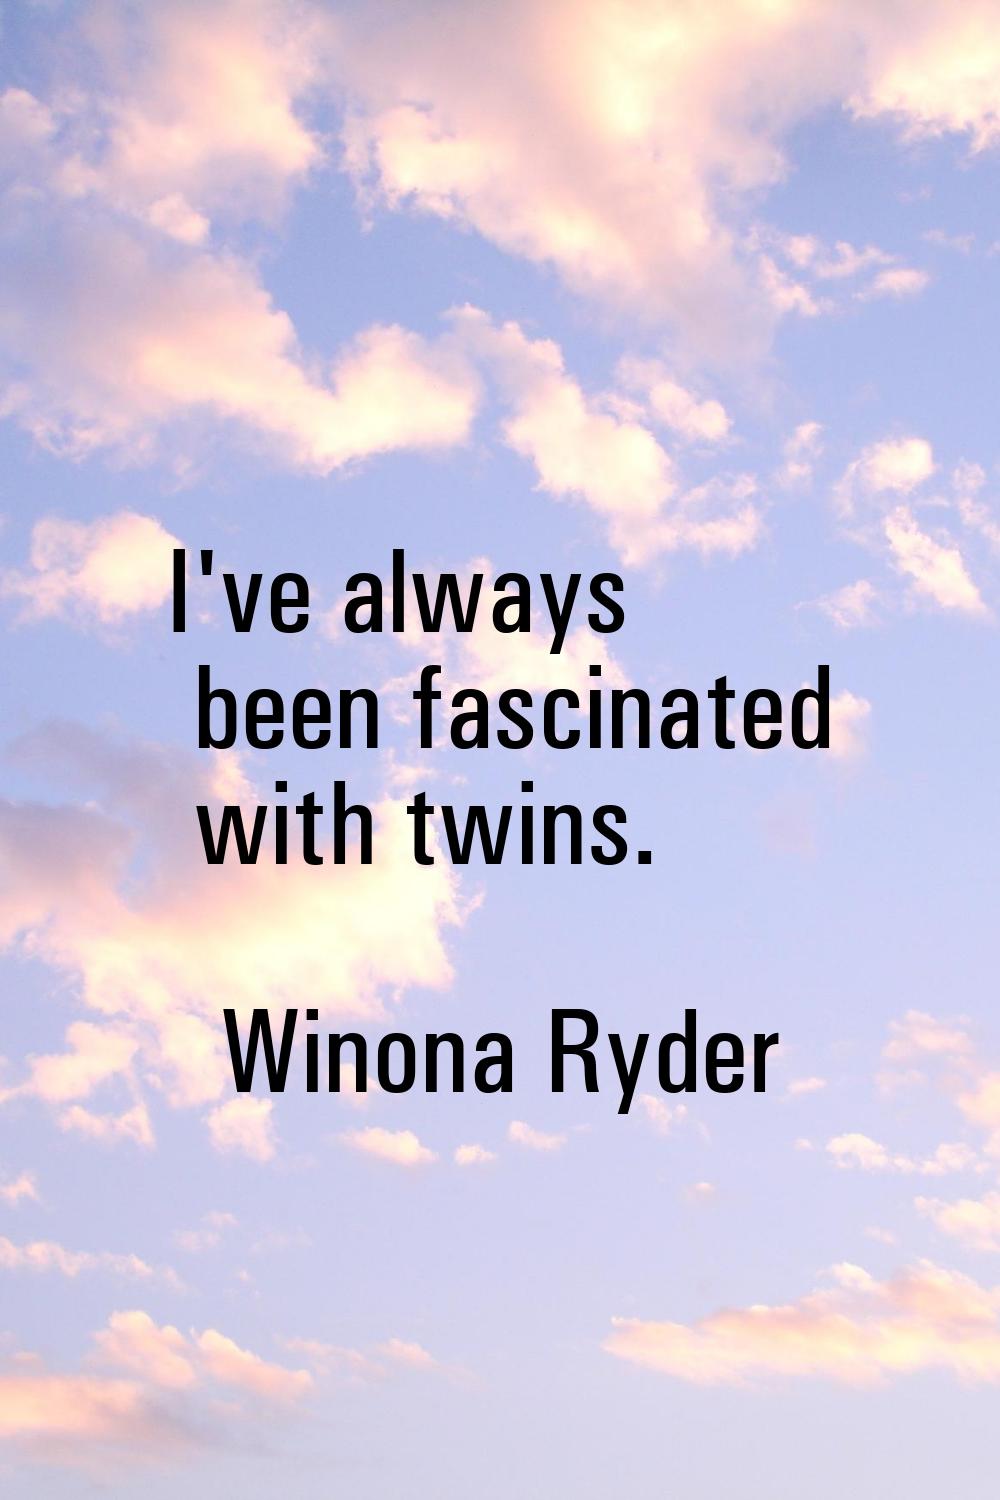 I've always been fascinated with twins.